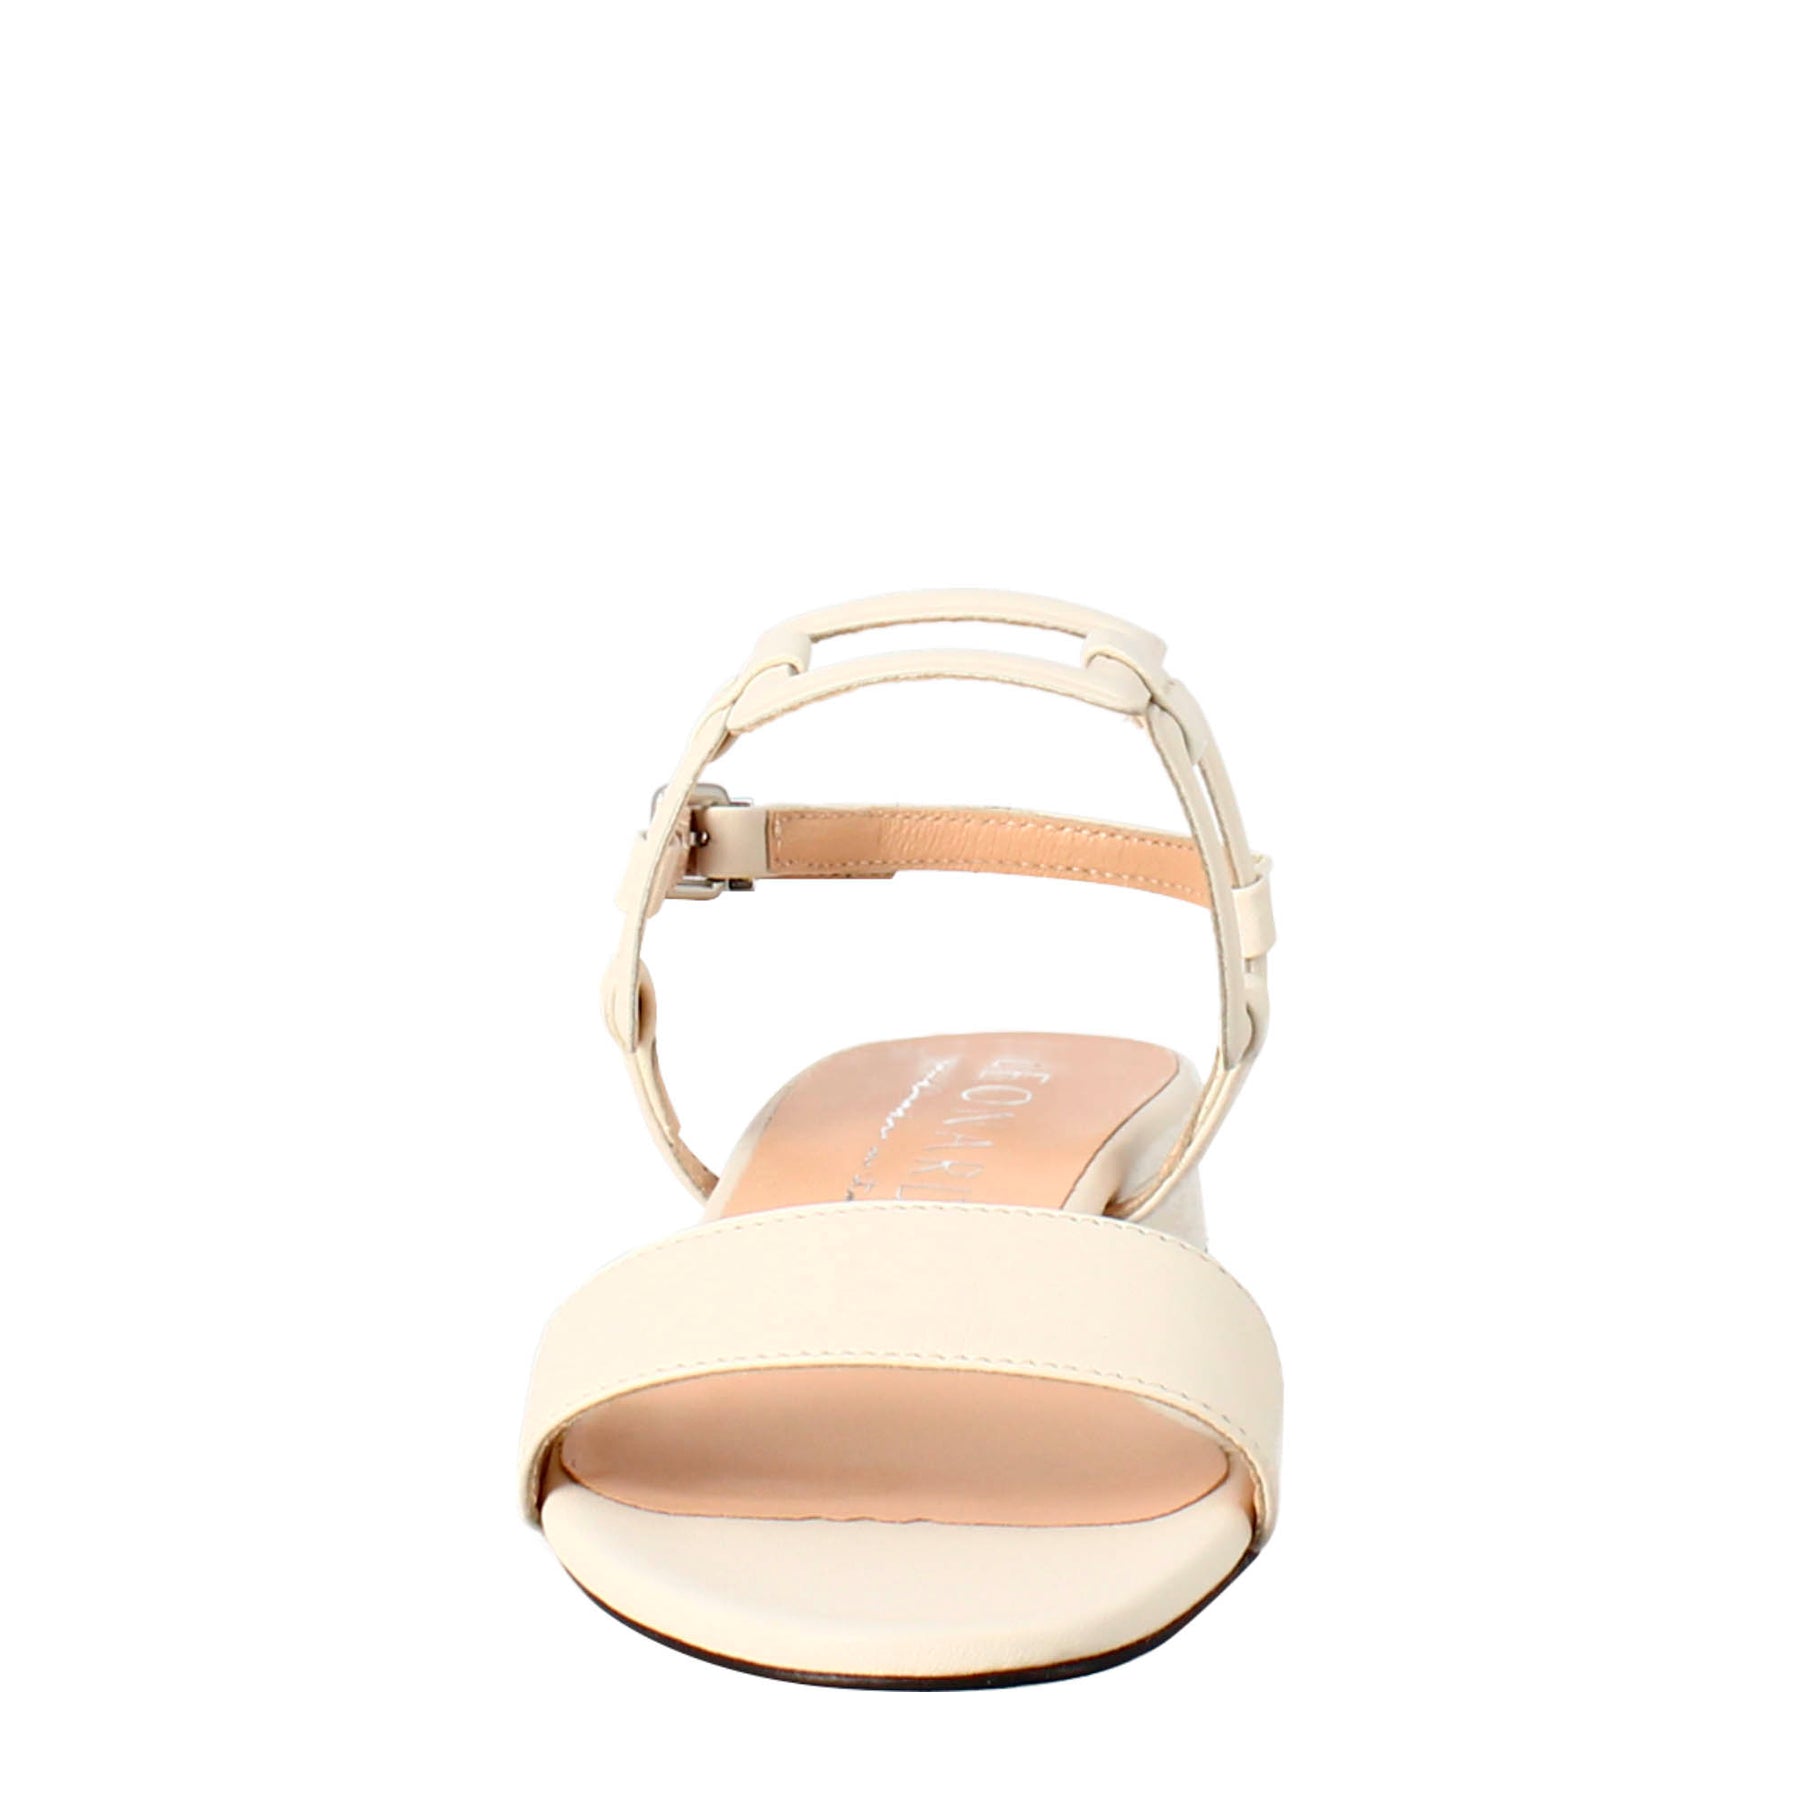 Woman's open sandal with low heel in cream leather